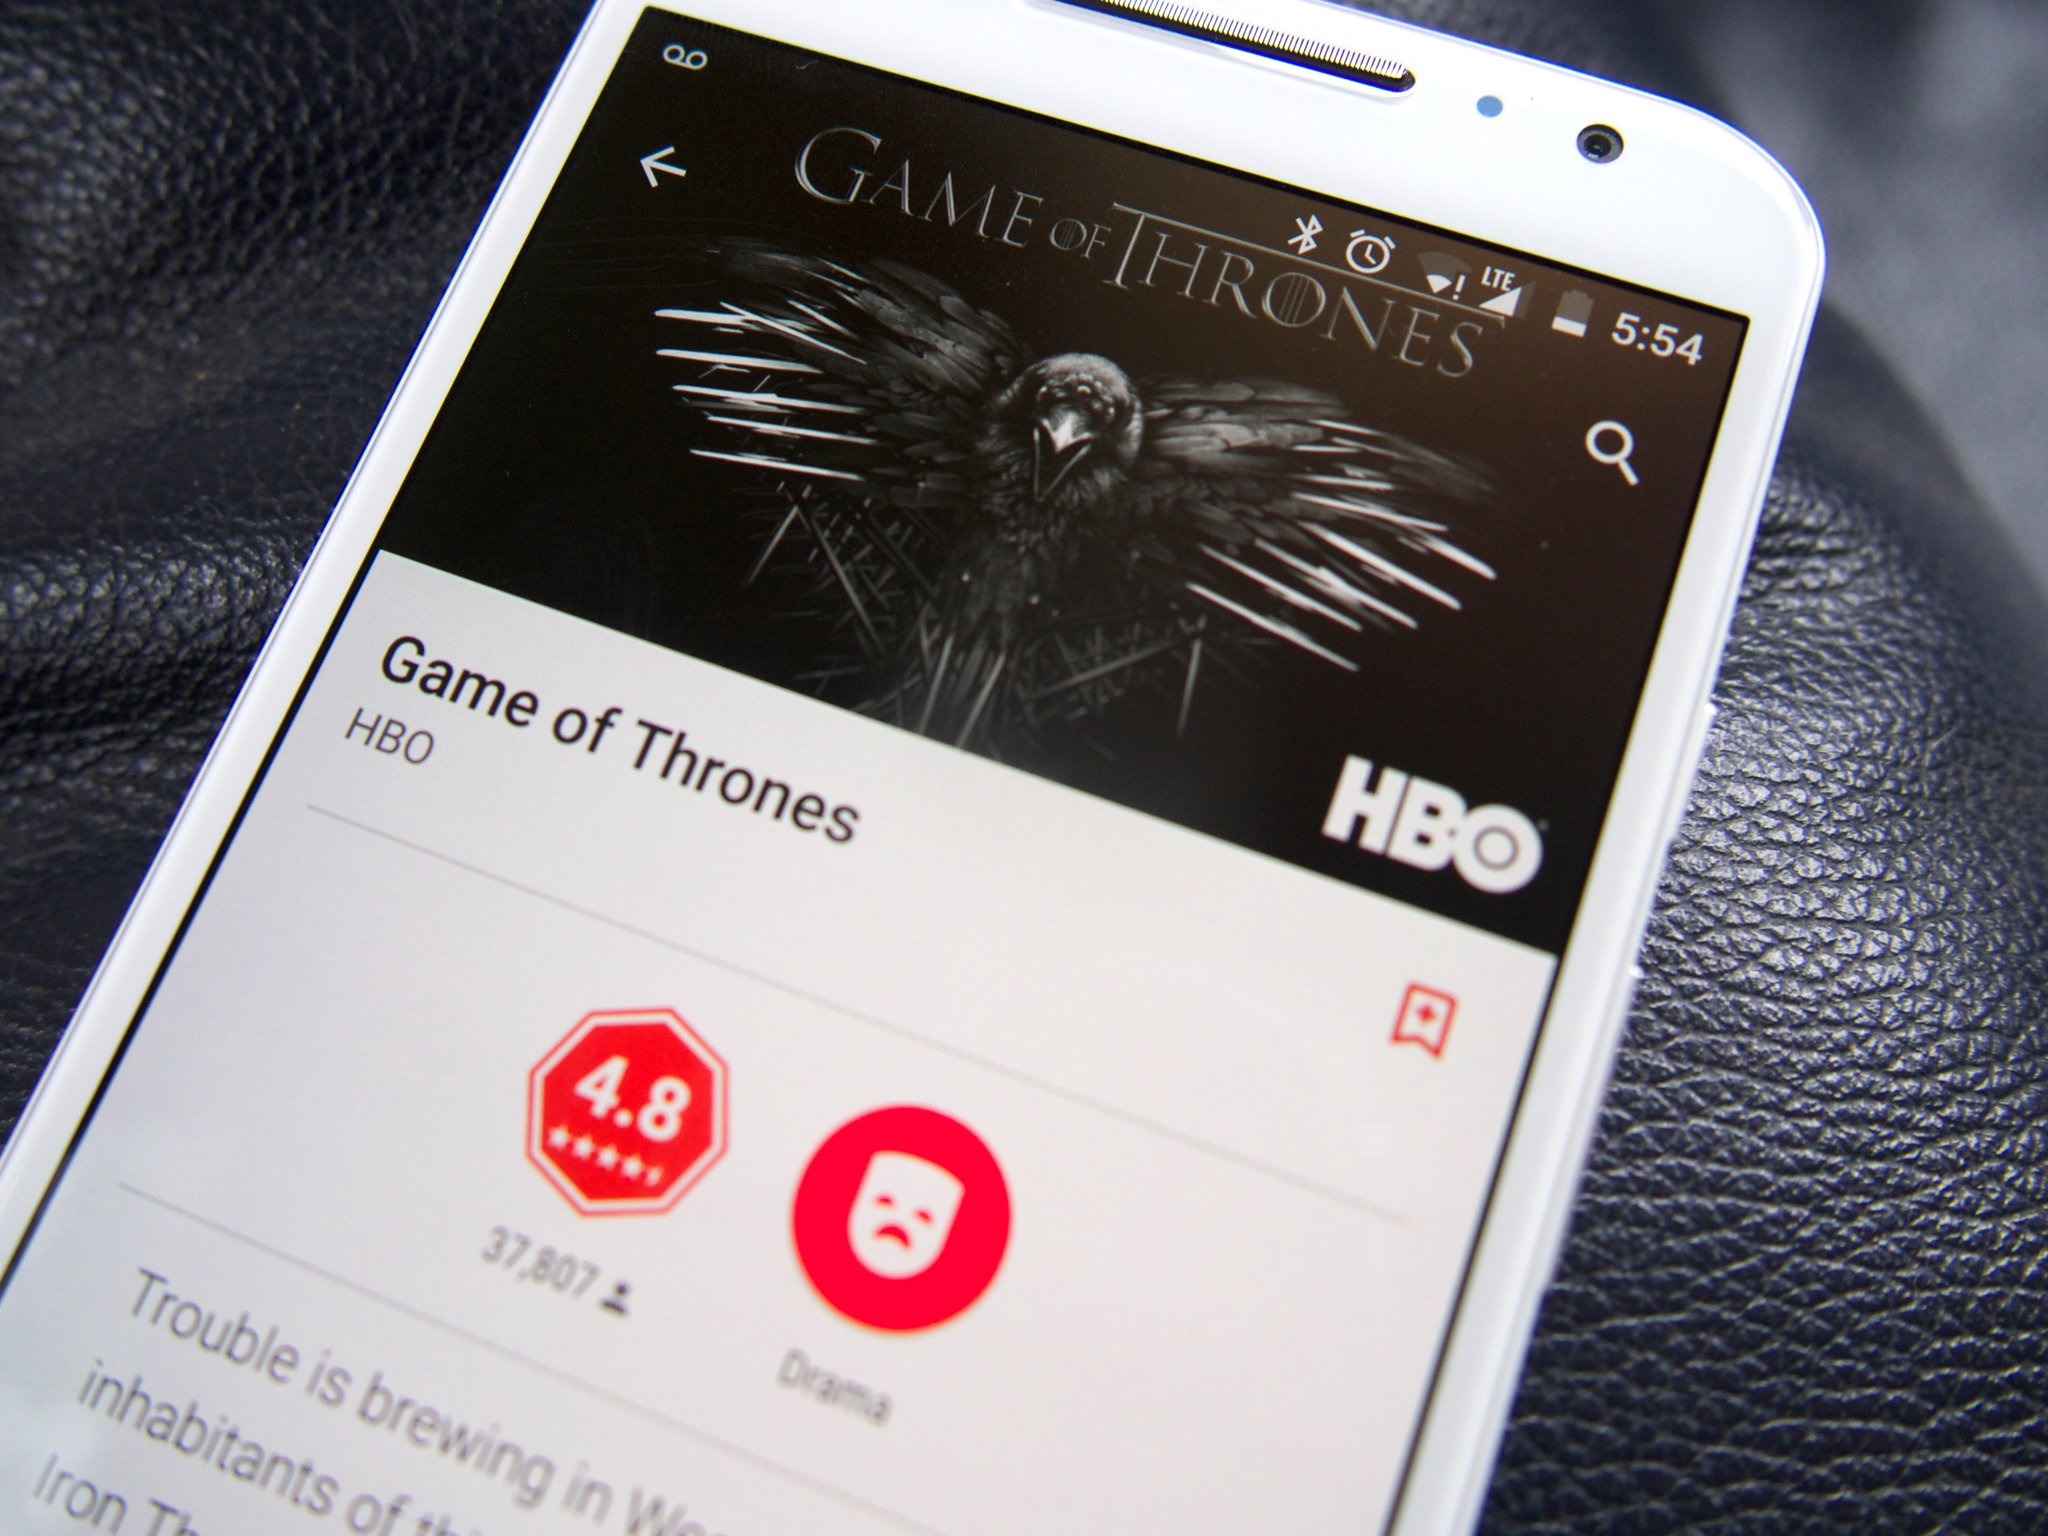 Snag Game of Thrones seasons 1 through 4 for $99 on Google Play